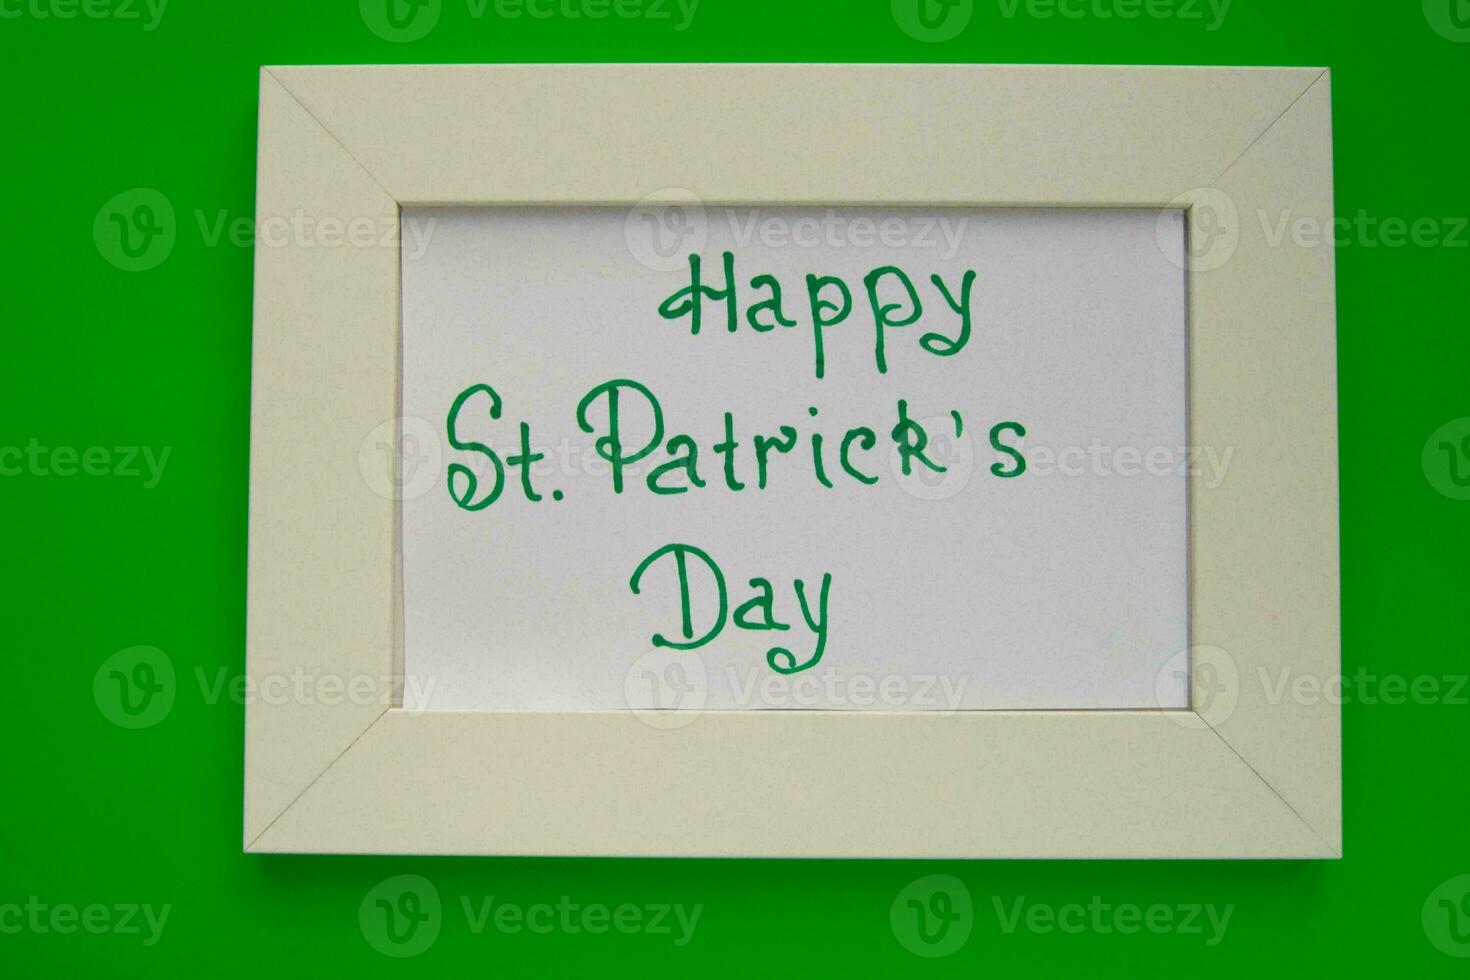 St. Patrick's Day Celebration, Festive Irish Holiday with Green Background, Concept of Shamrock Tradition in March Festival photo